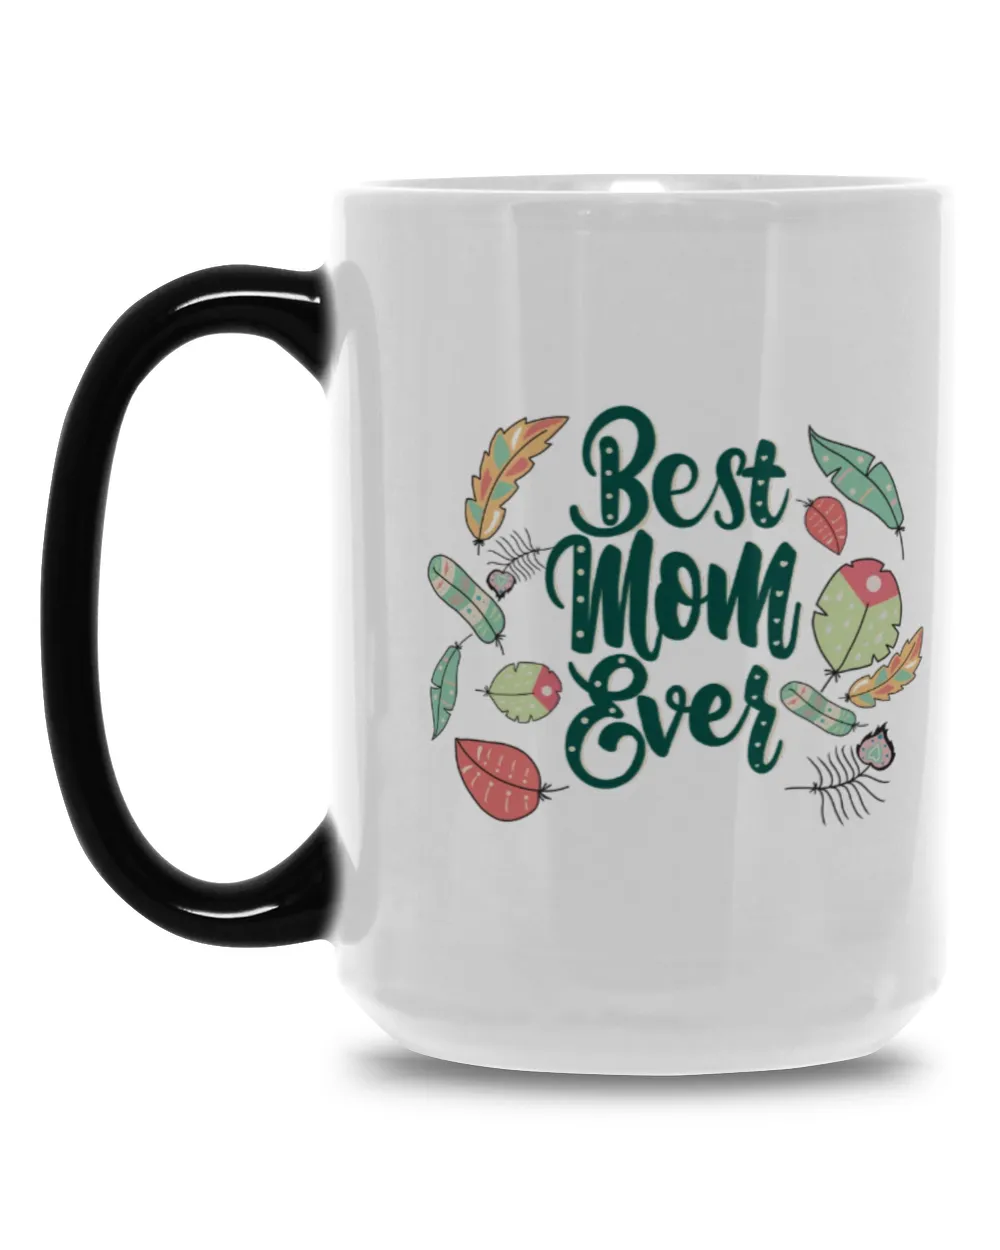 Double of the love to Mom, Mother's Day Gift, Dual Design